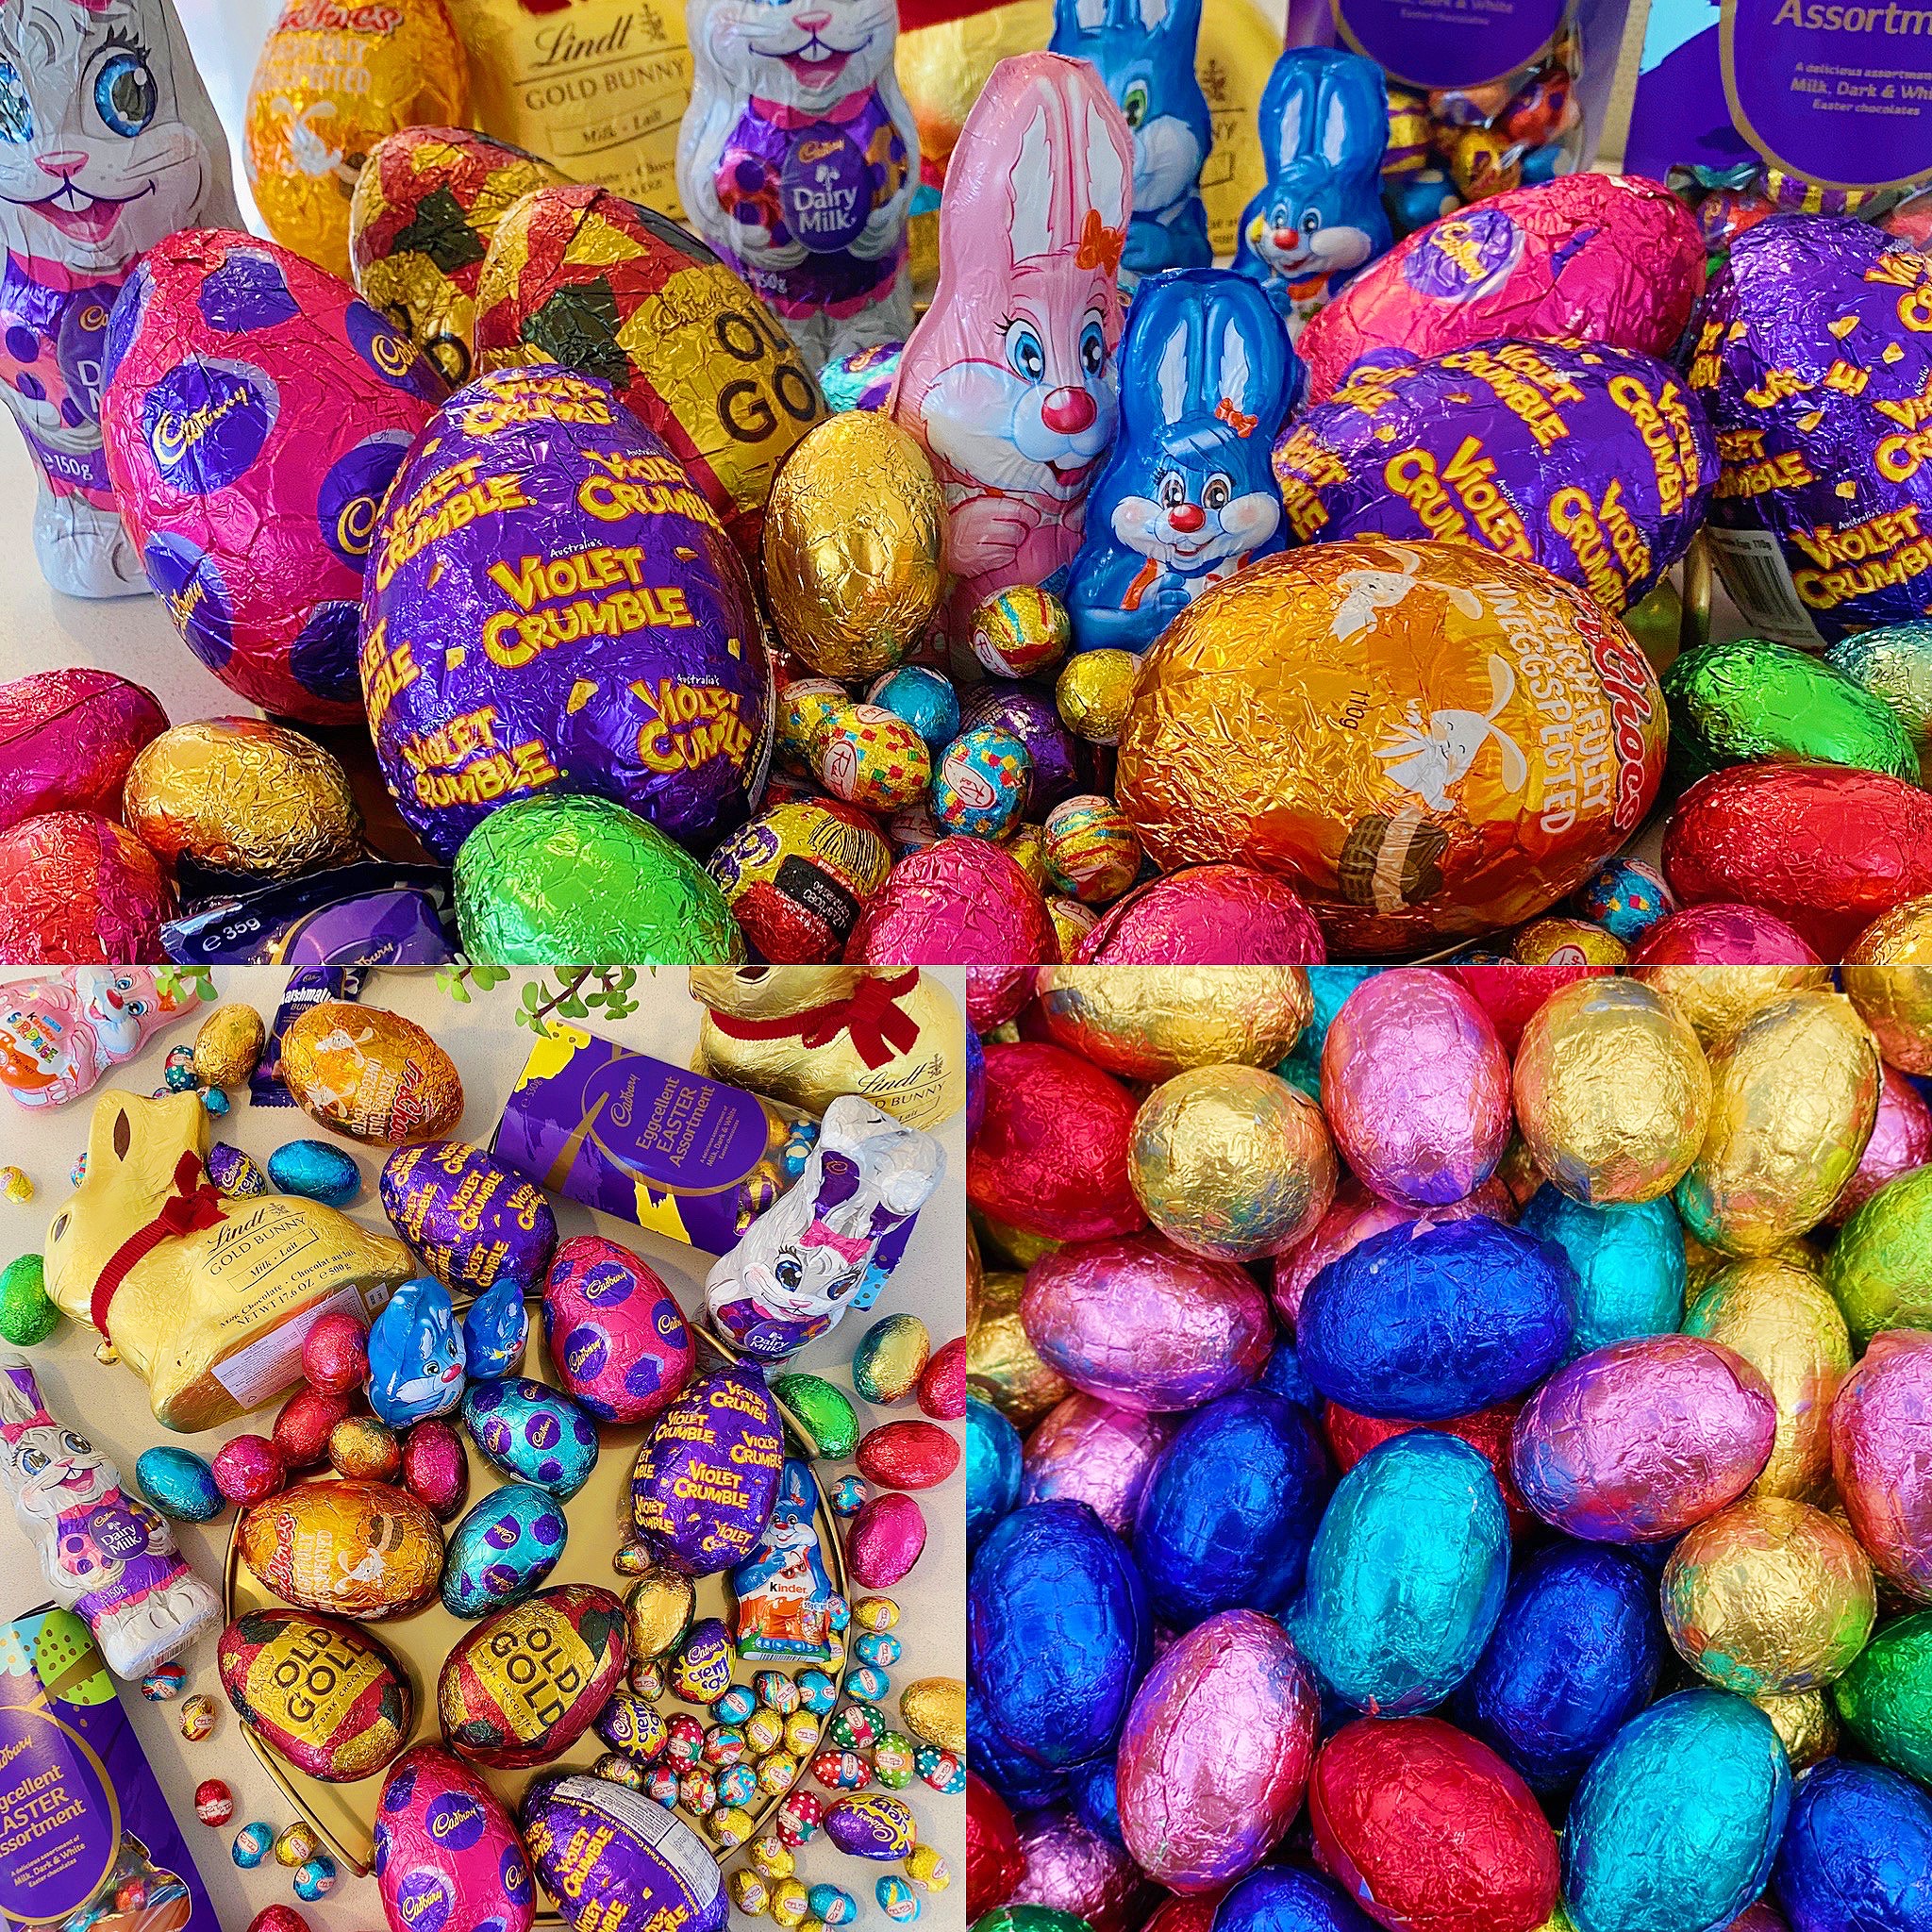 Win a truckload of Easter chocolate thanks to Romeos